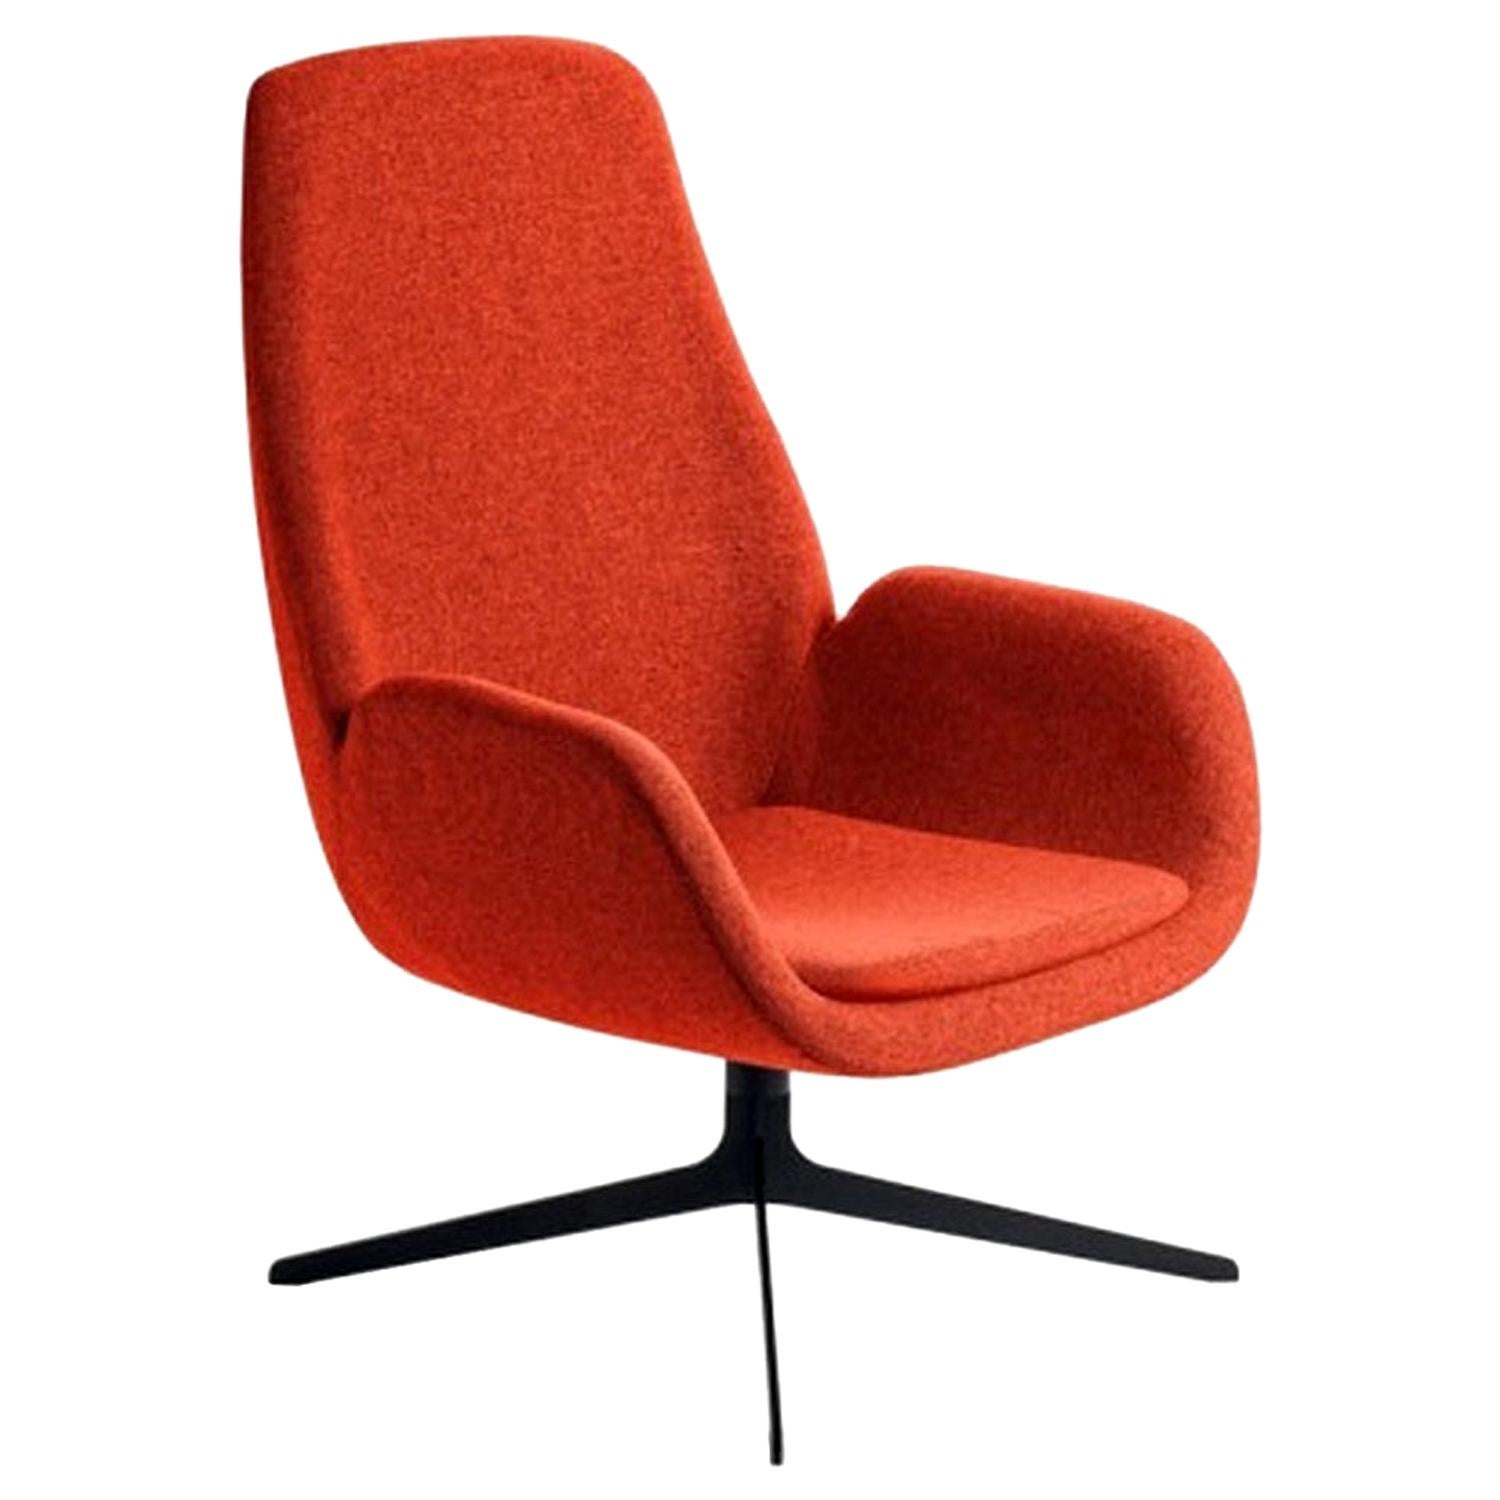 Red Mysa Lounge Chair, Designed by Michael Schmidt, Made in Italy